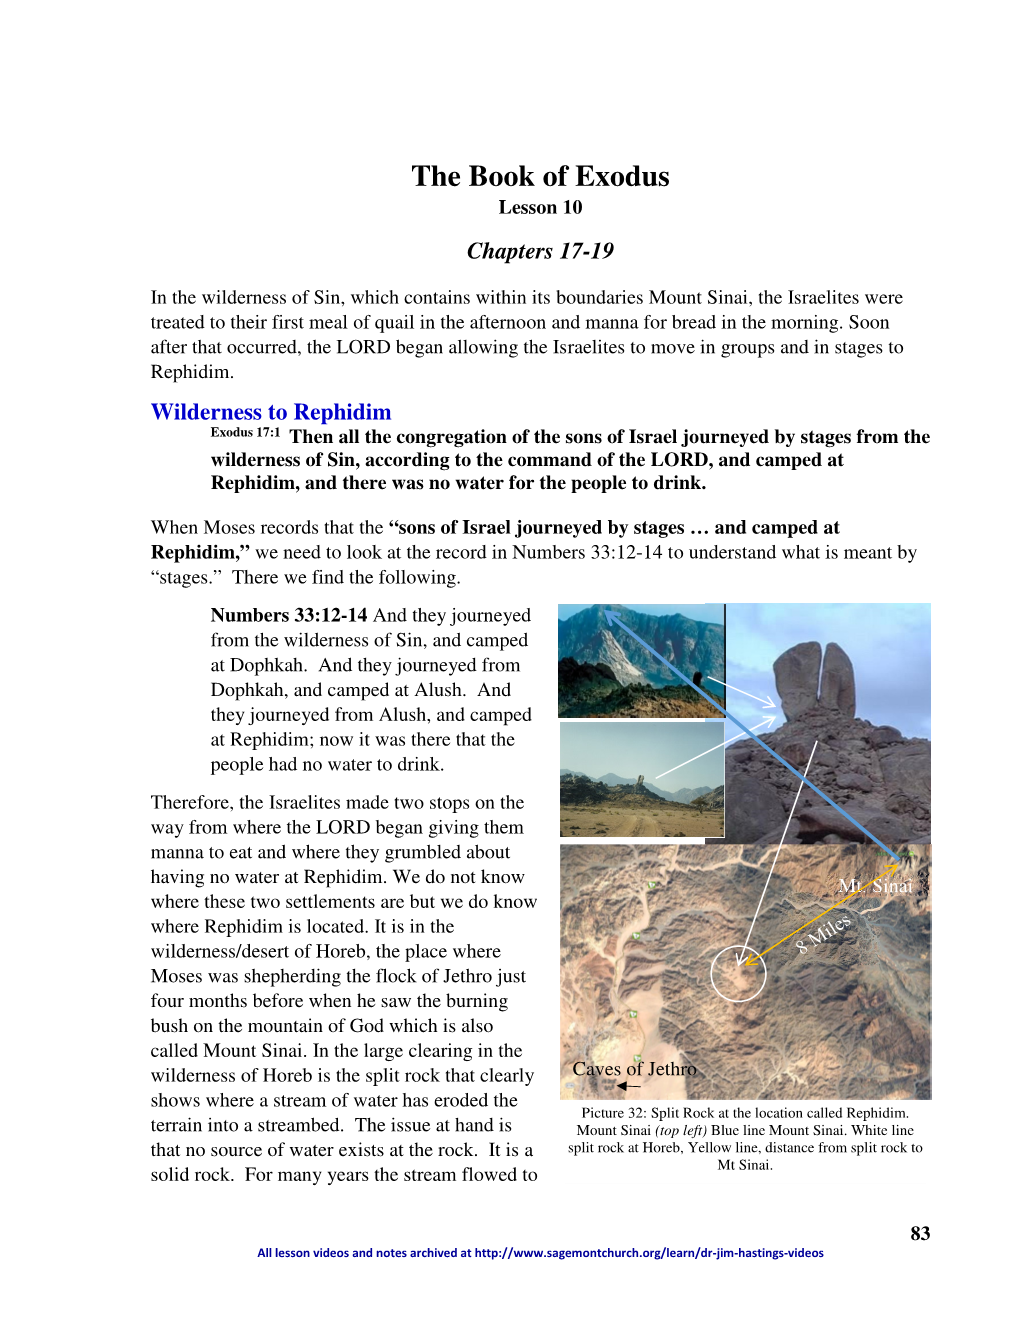 The Book of Exodus Lesson 10 Chapters 17-19